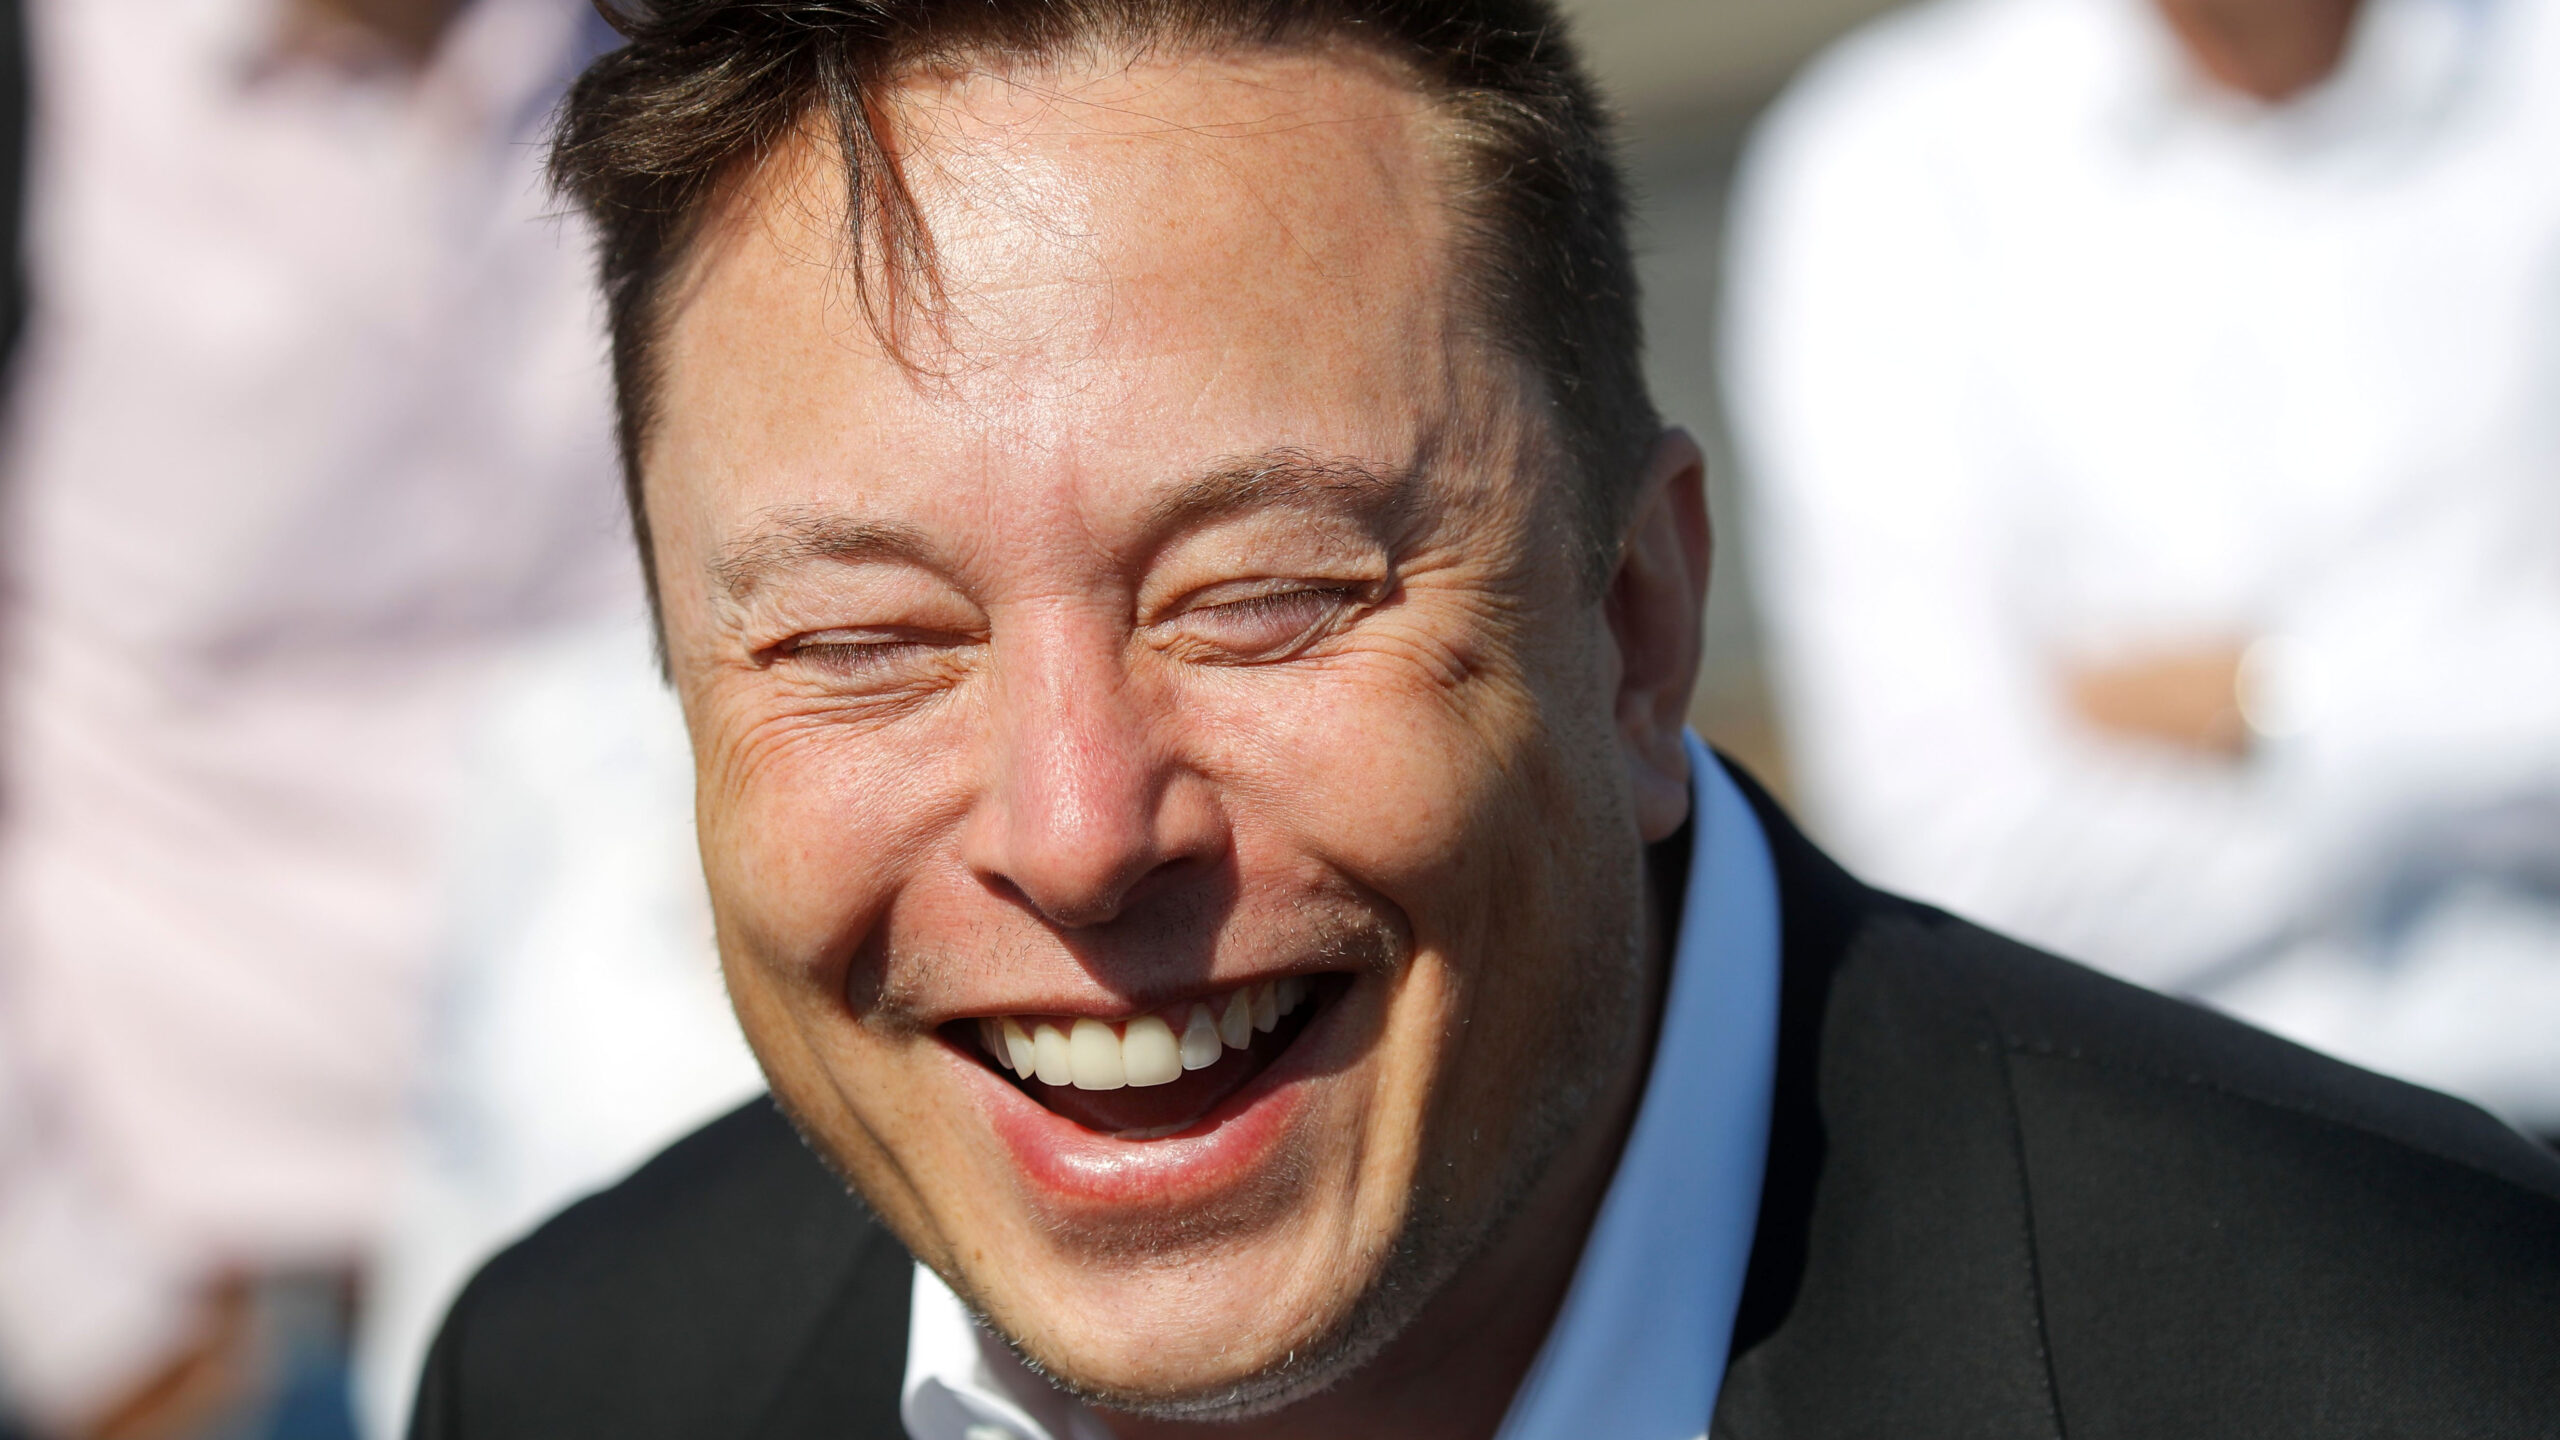 Elon Musk Posts Meme Tweets Outlining Ideological Journey To The Right Far Left Hates Everyone Themselves Included